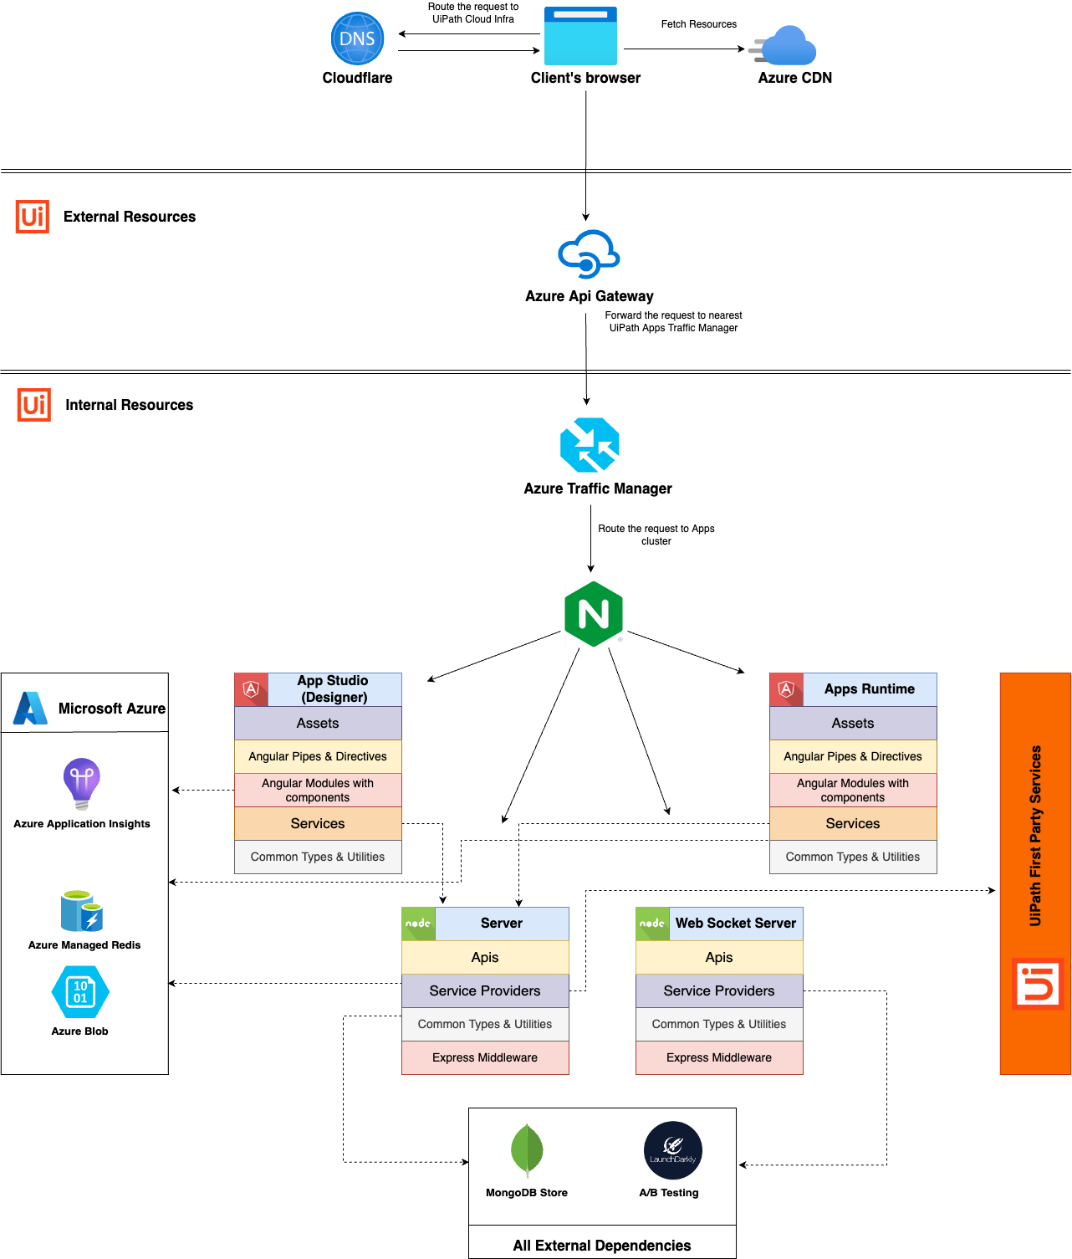 a graphic representation of the UiPath Apps workflow